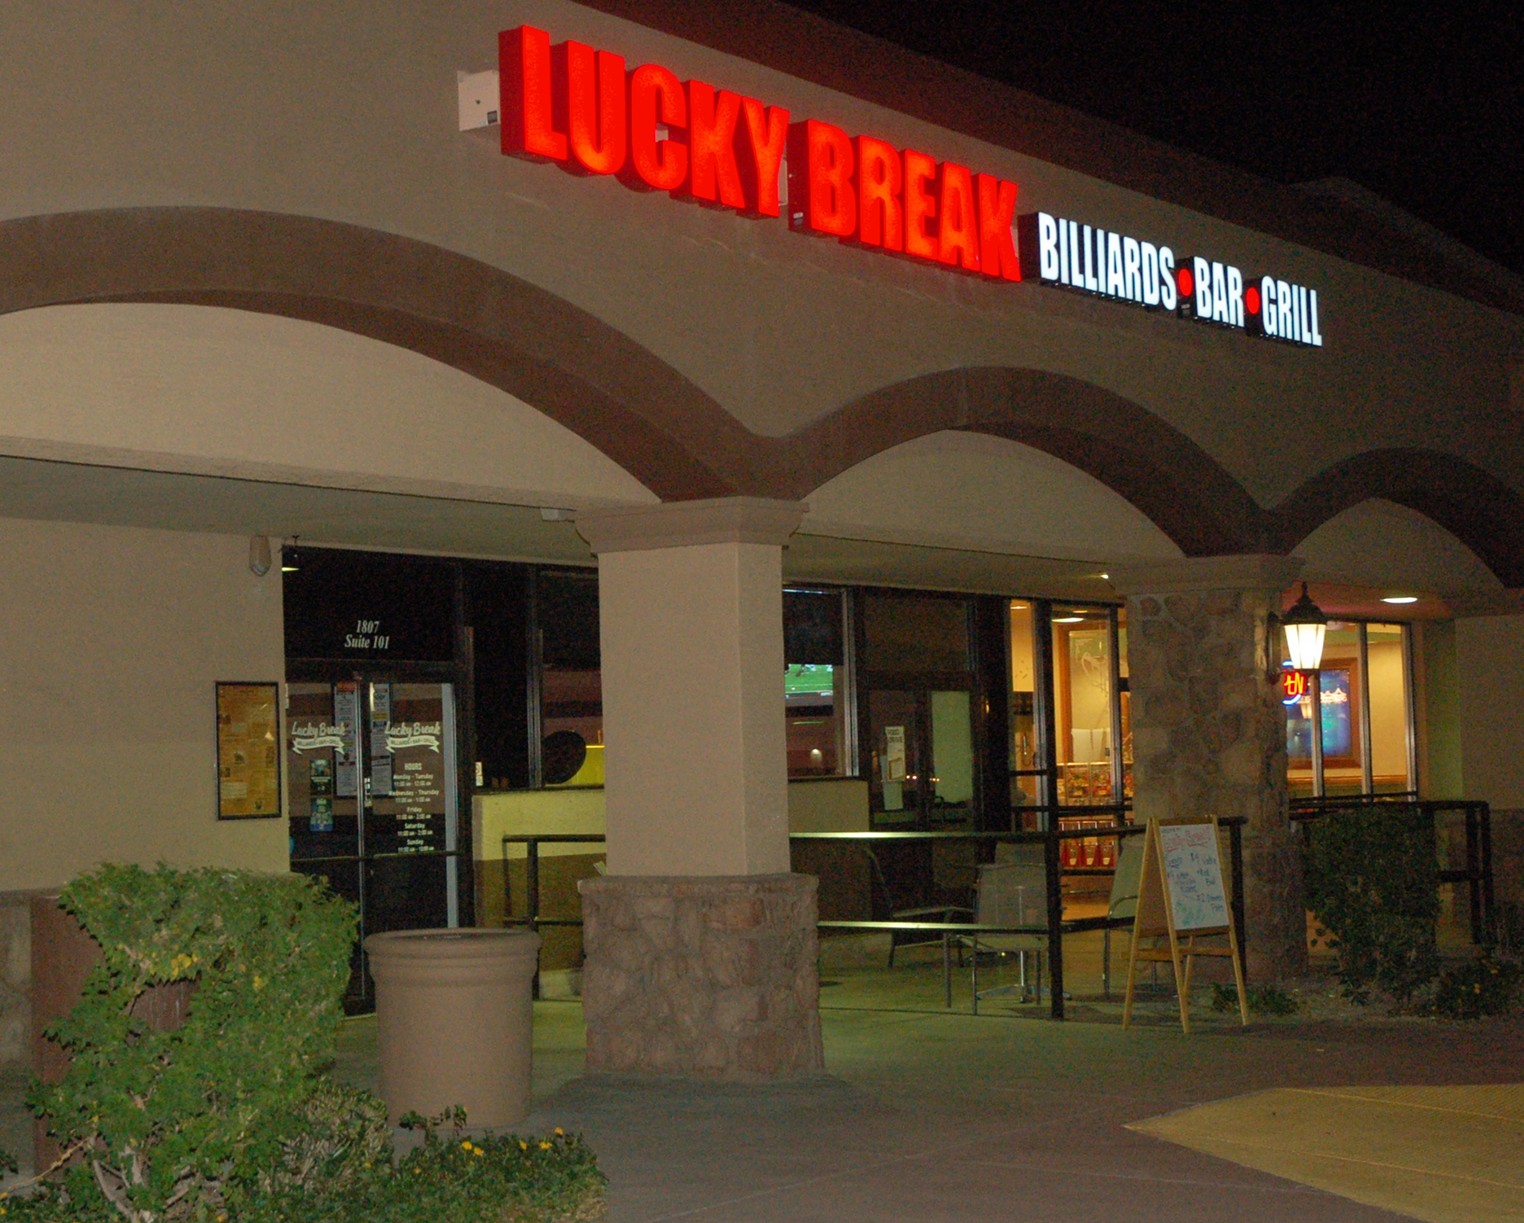 Best Sports Bar, Tempe 2013 Lucky Break Bars and Clubs Phoenix pic